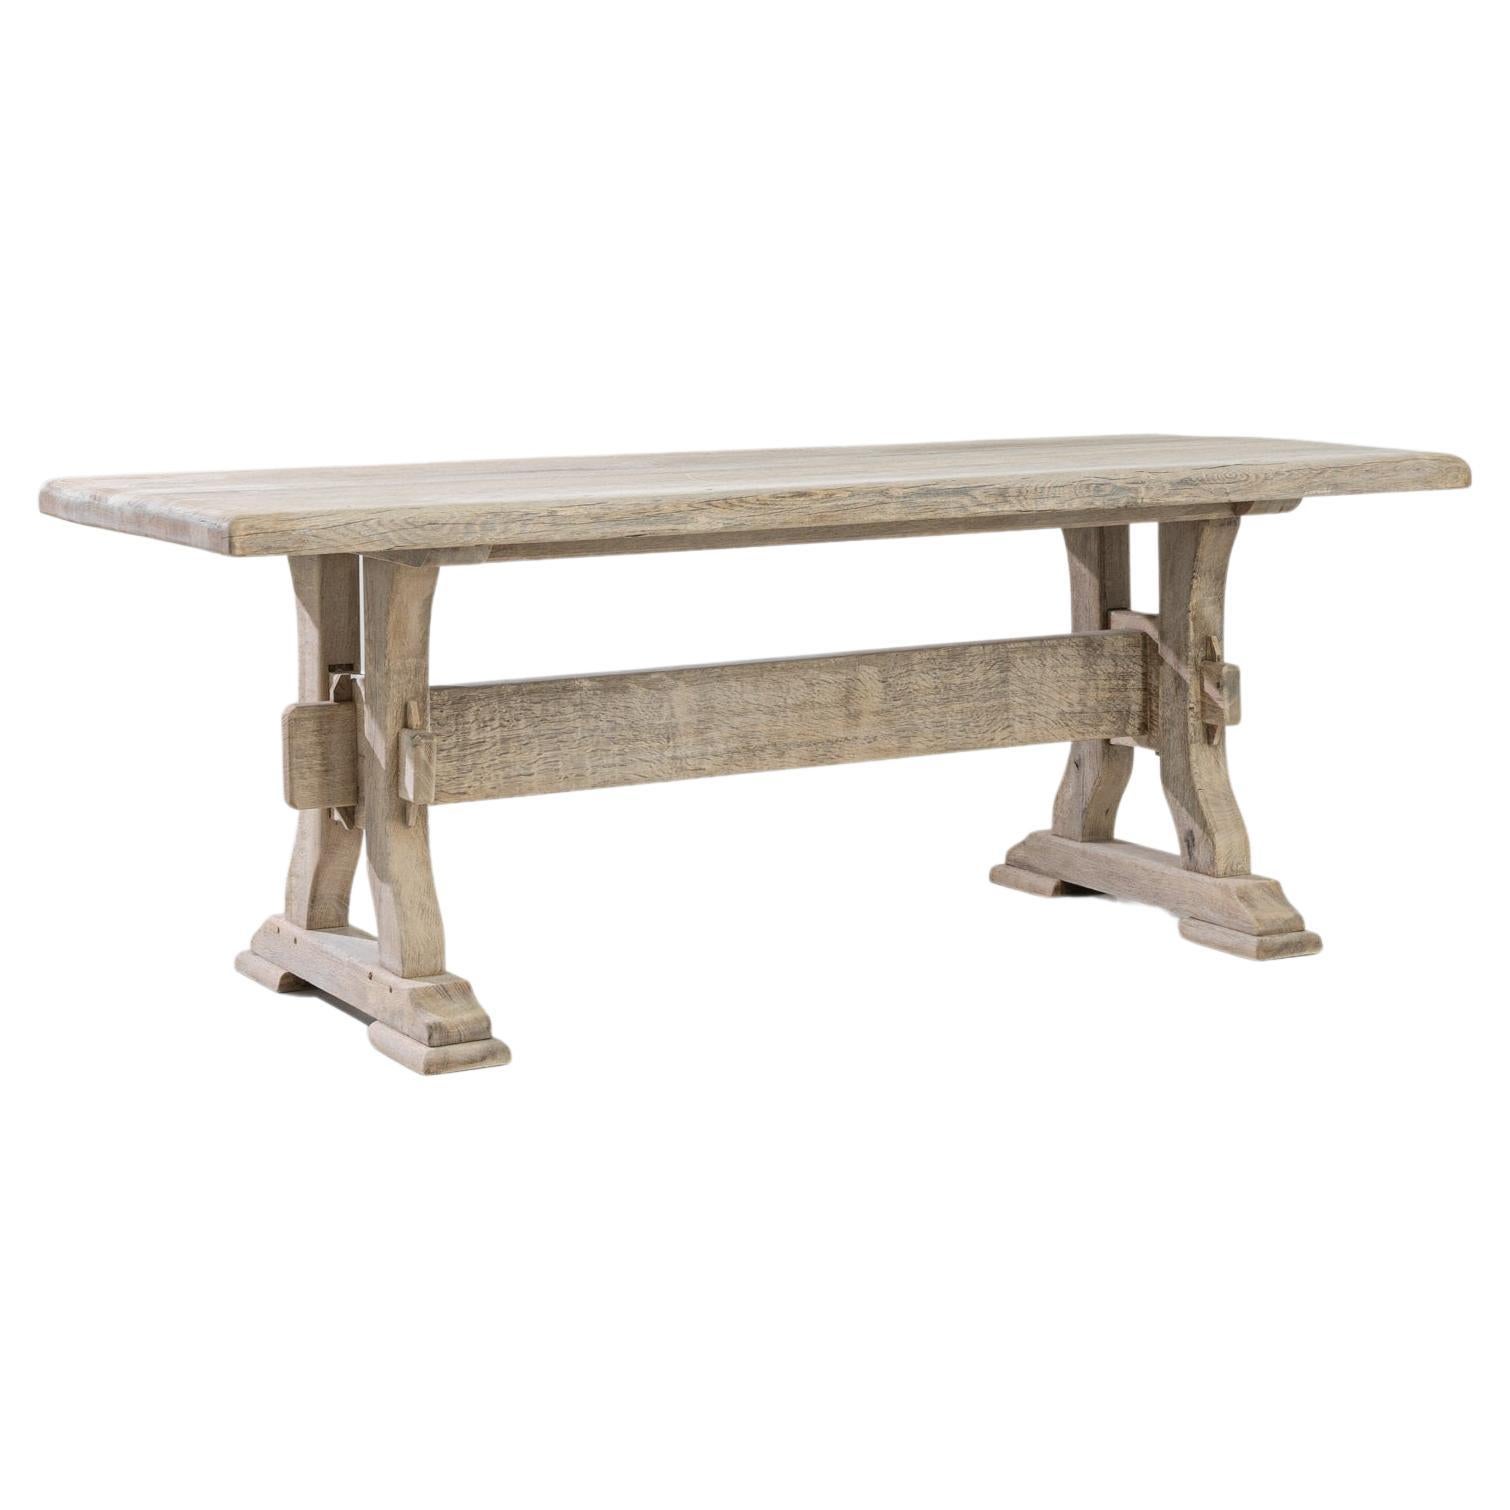 Belgian Country Bleached Oak Dining Table